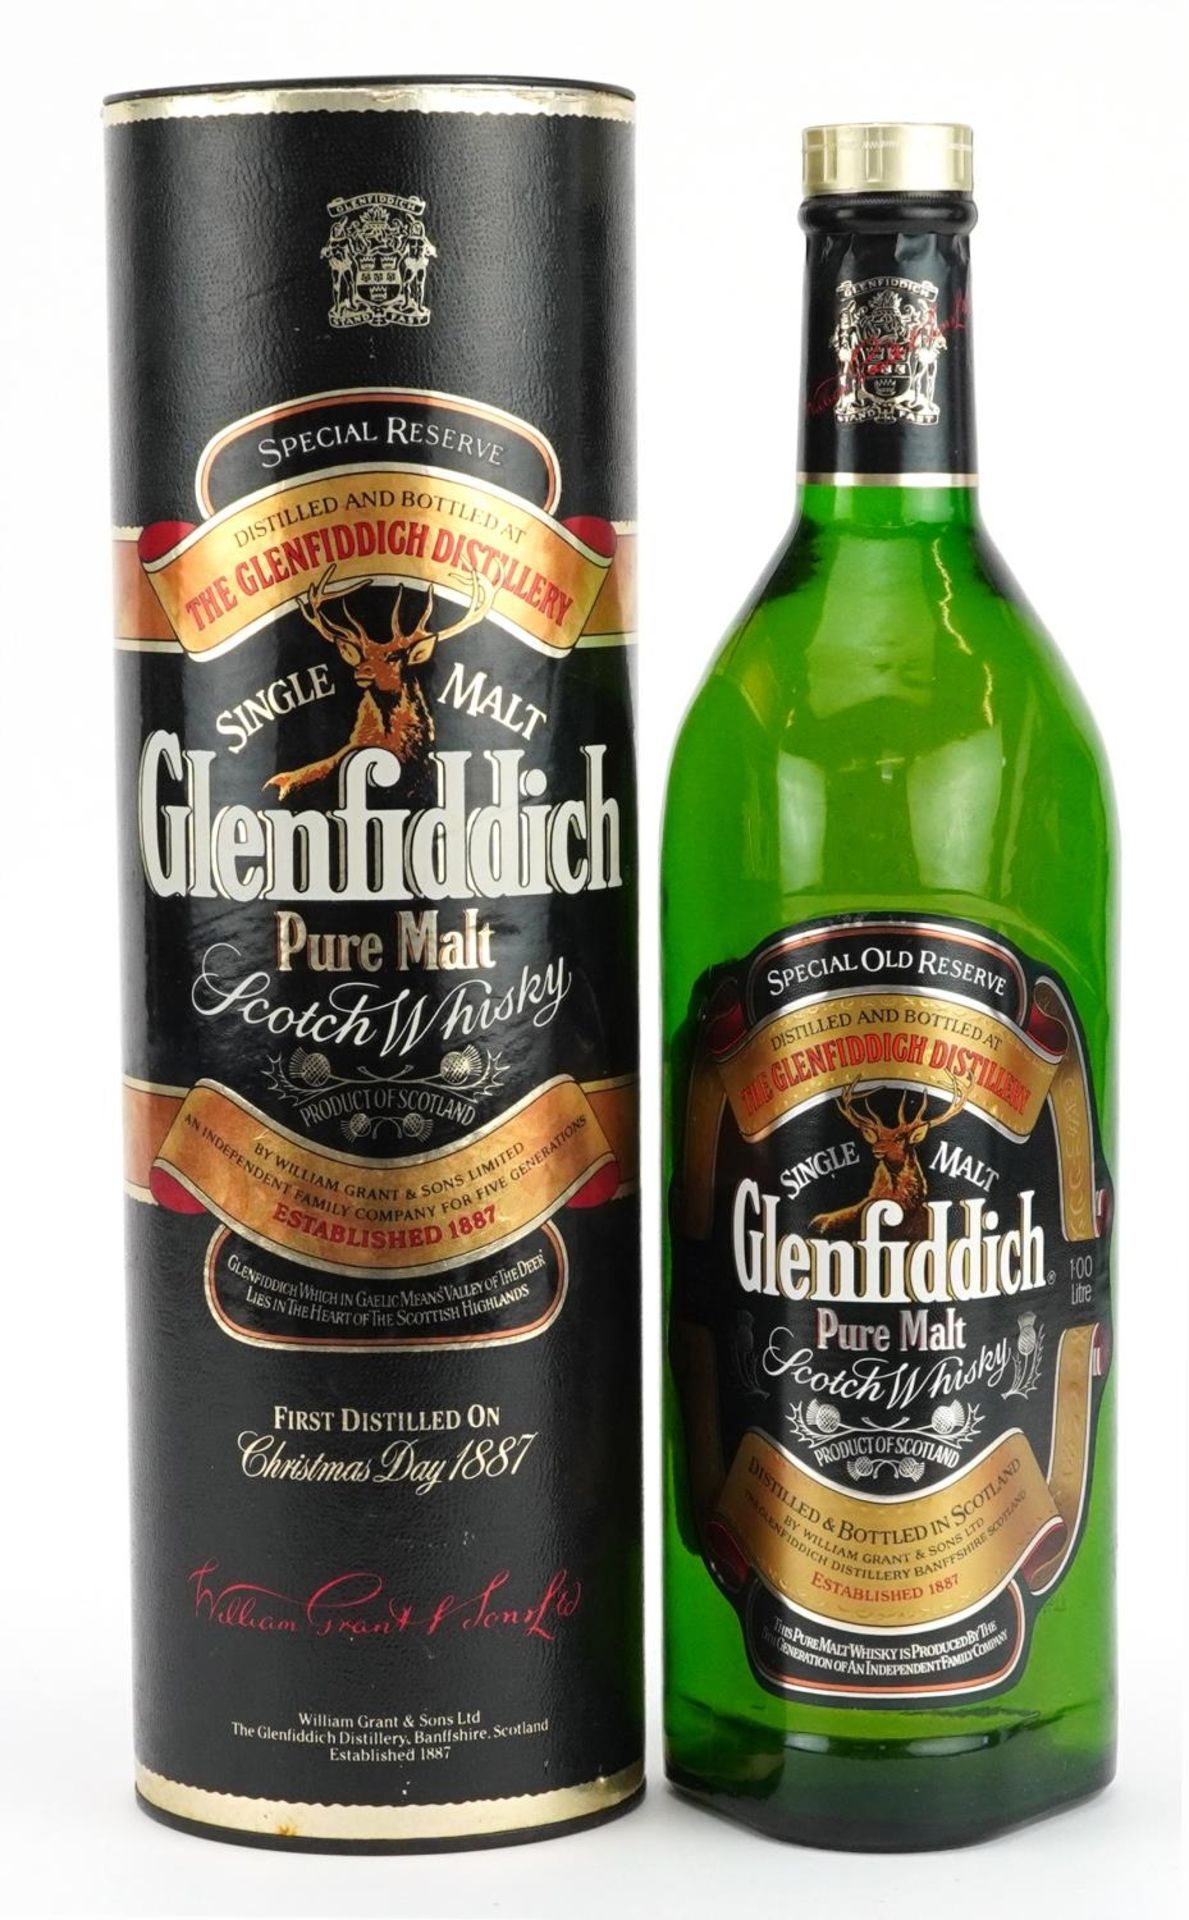 One litre bottle of Glenfiddich Pure Malt Scotch whisky with box, first distilled on Christmas day